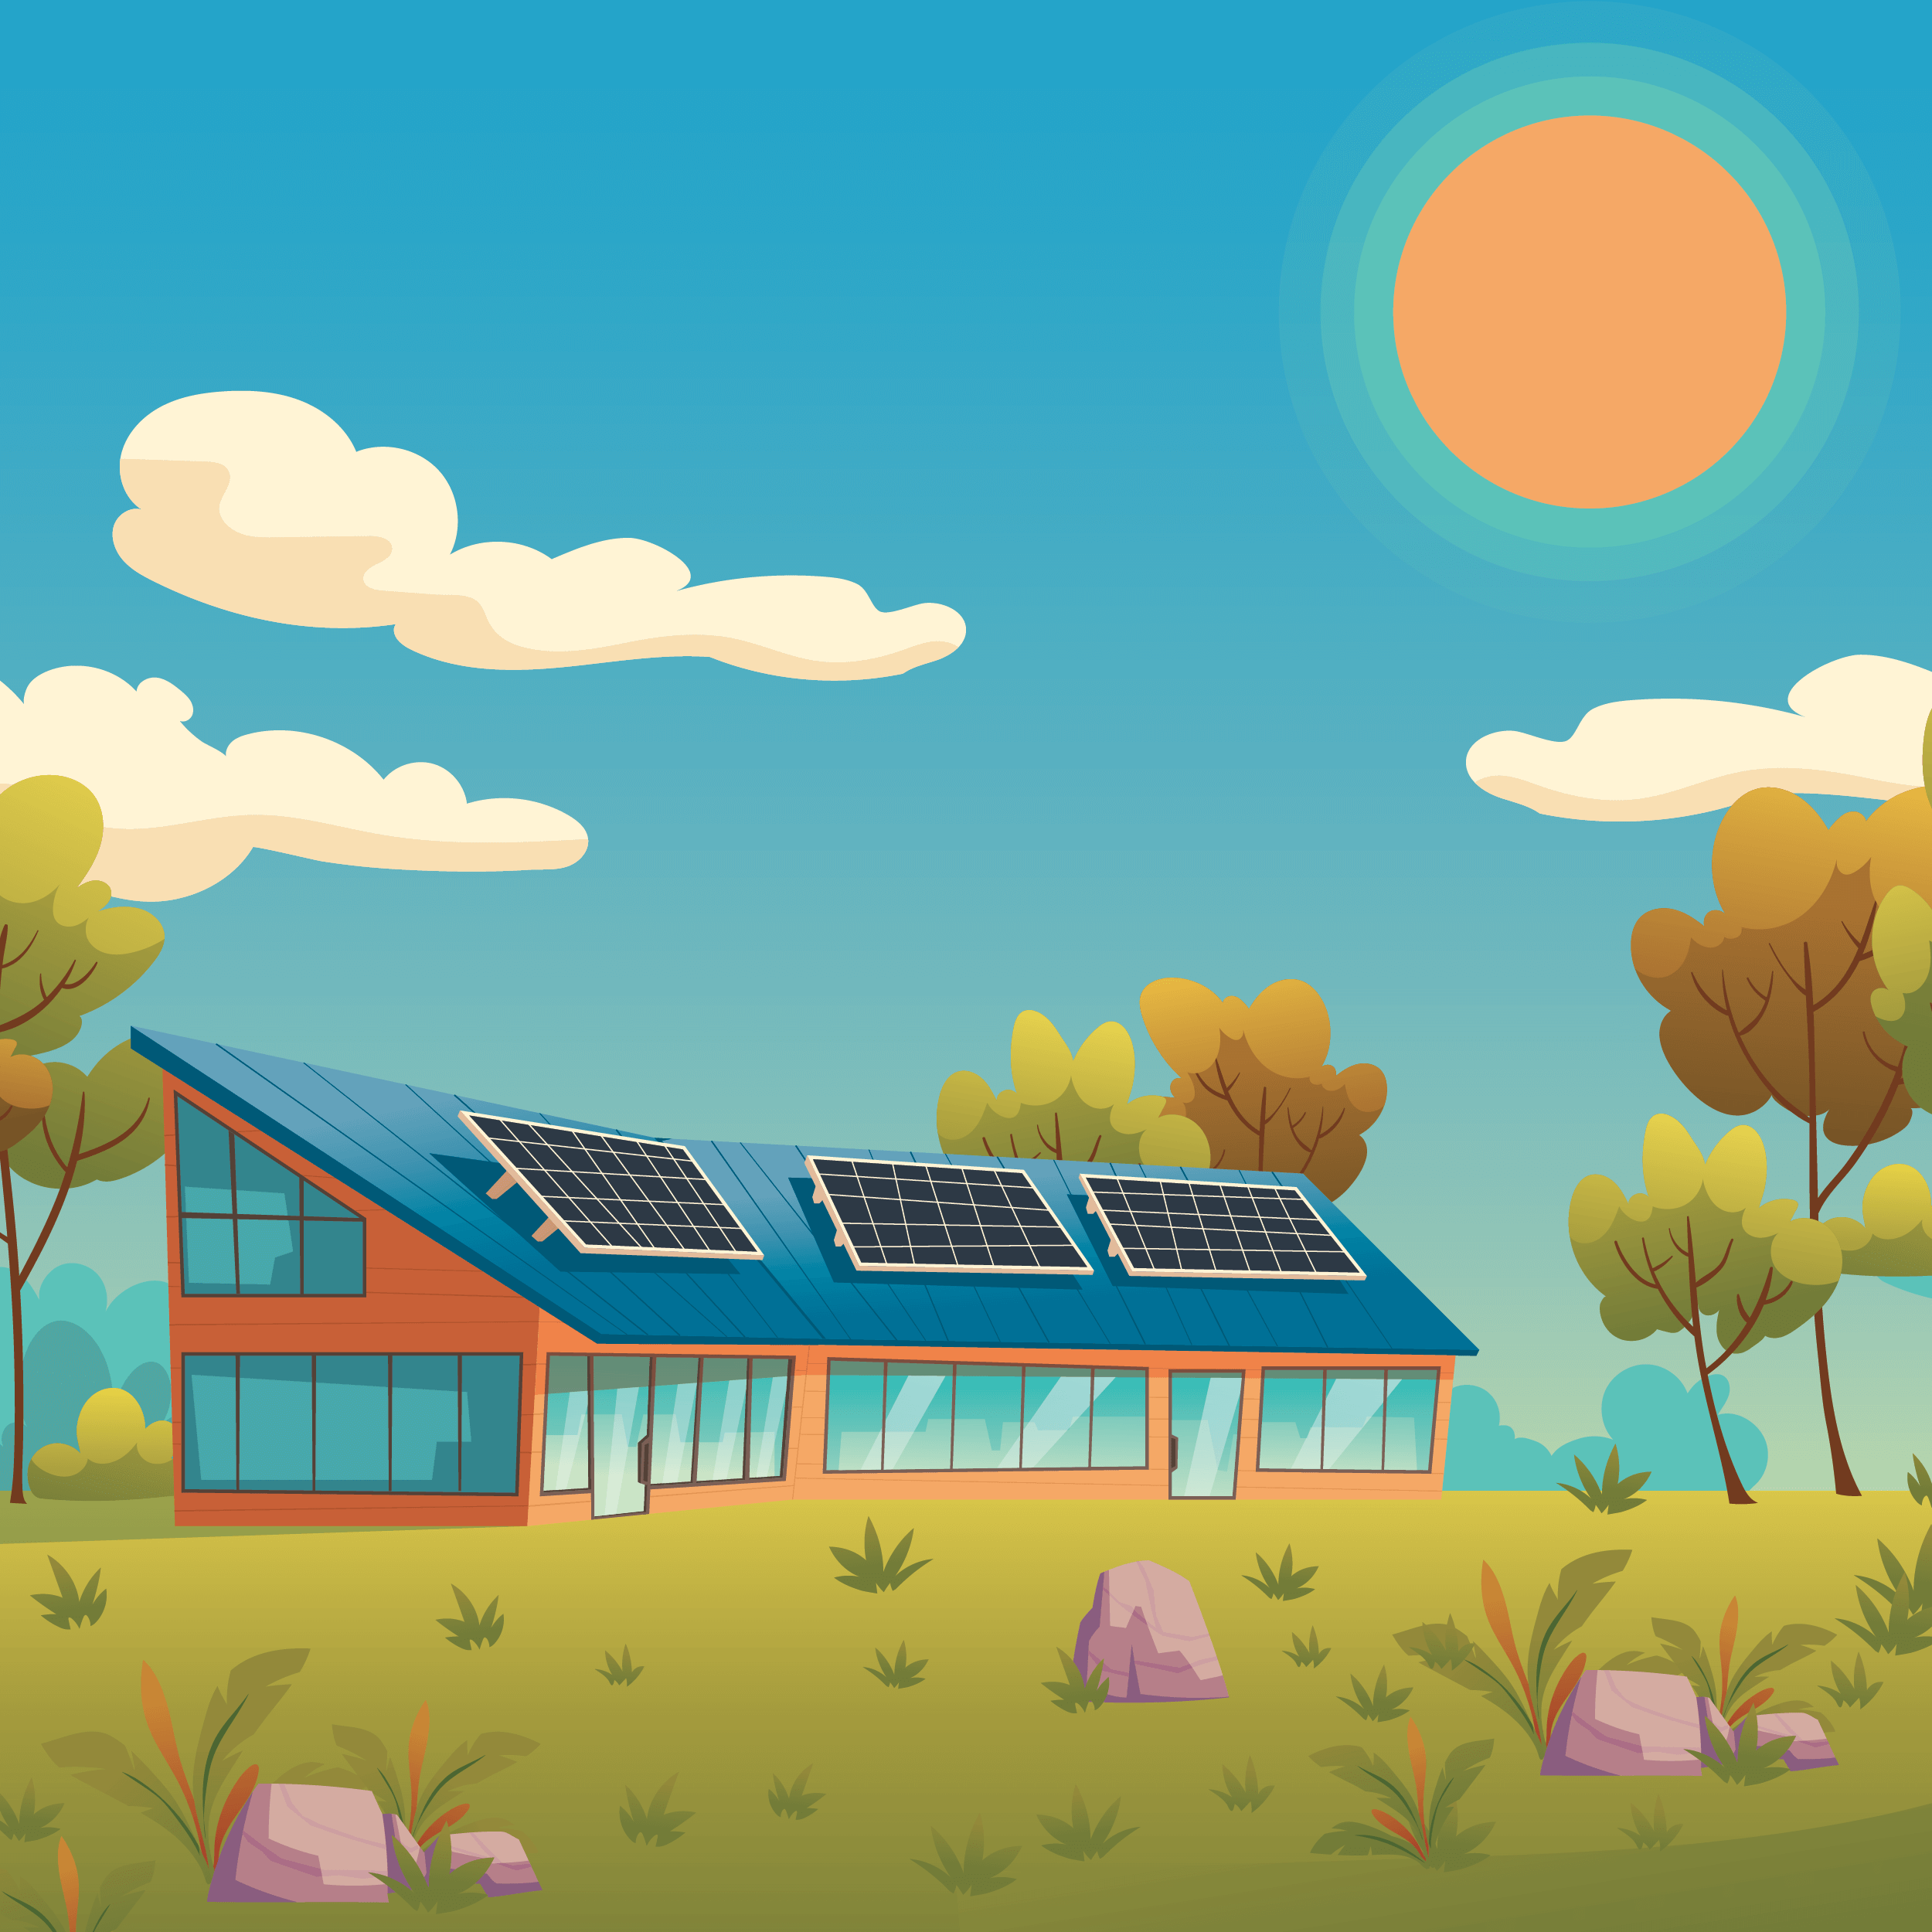 Illustration of "L-shaped" home with 3 solar panels on roof, surrounded by springtime landscape including a sun in the sky